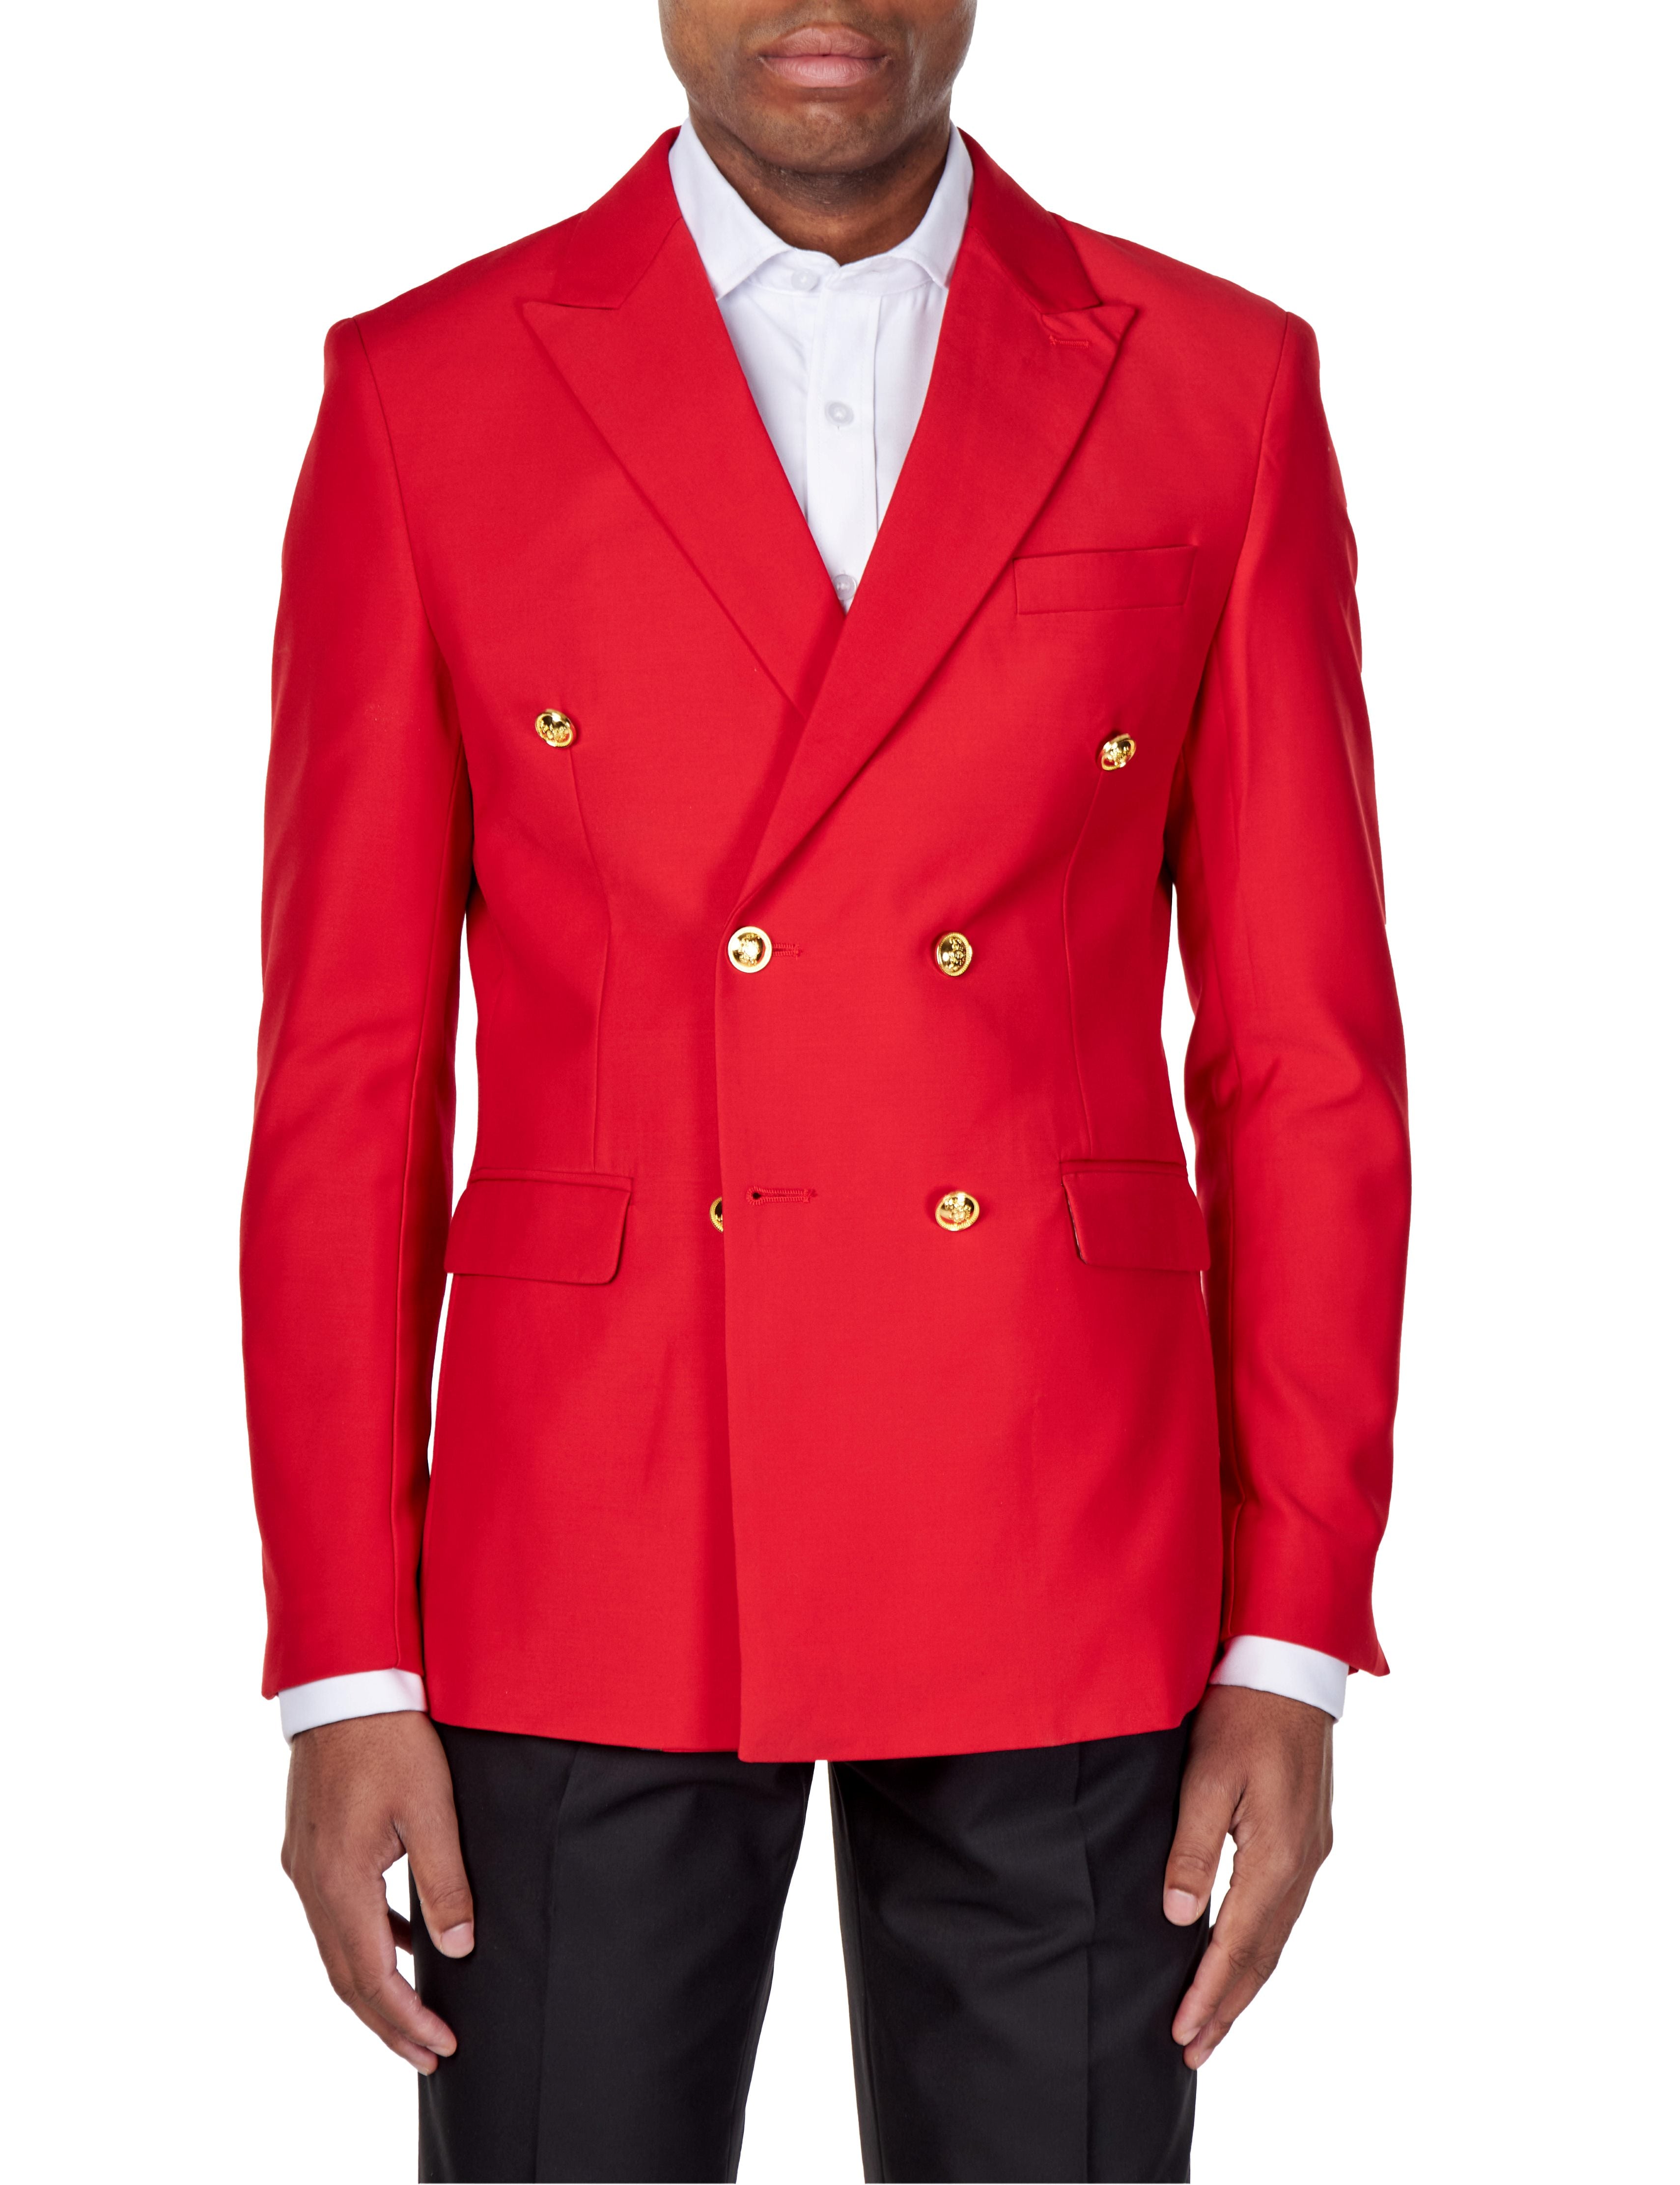 RED DOUBLE BREASTED GOLD BUTTON JACKET